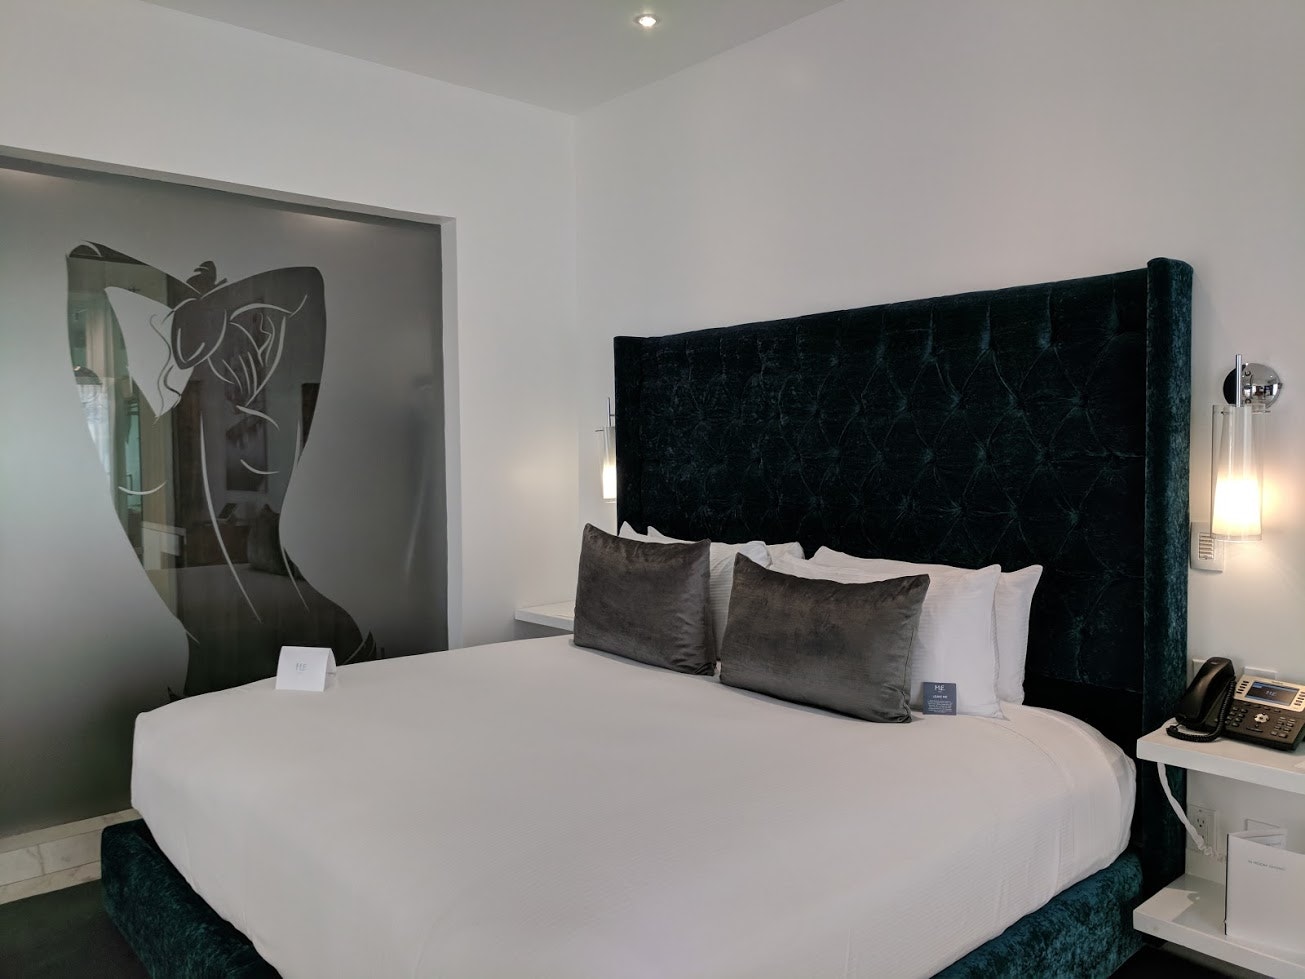 A white hotel bed in Cabo San Lucas sits by a glass partition with the stylized outline of a woman etched onto it in varying tones of grey